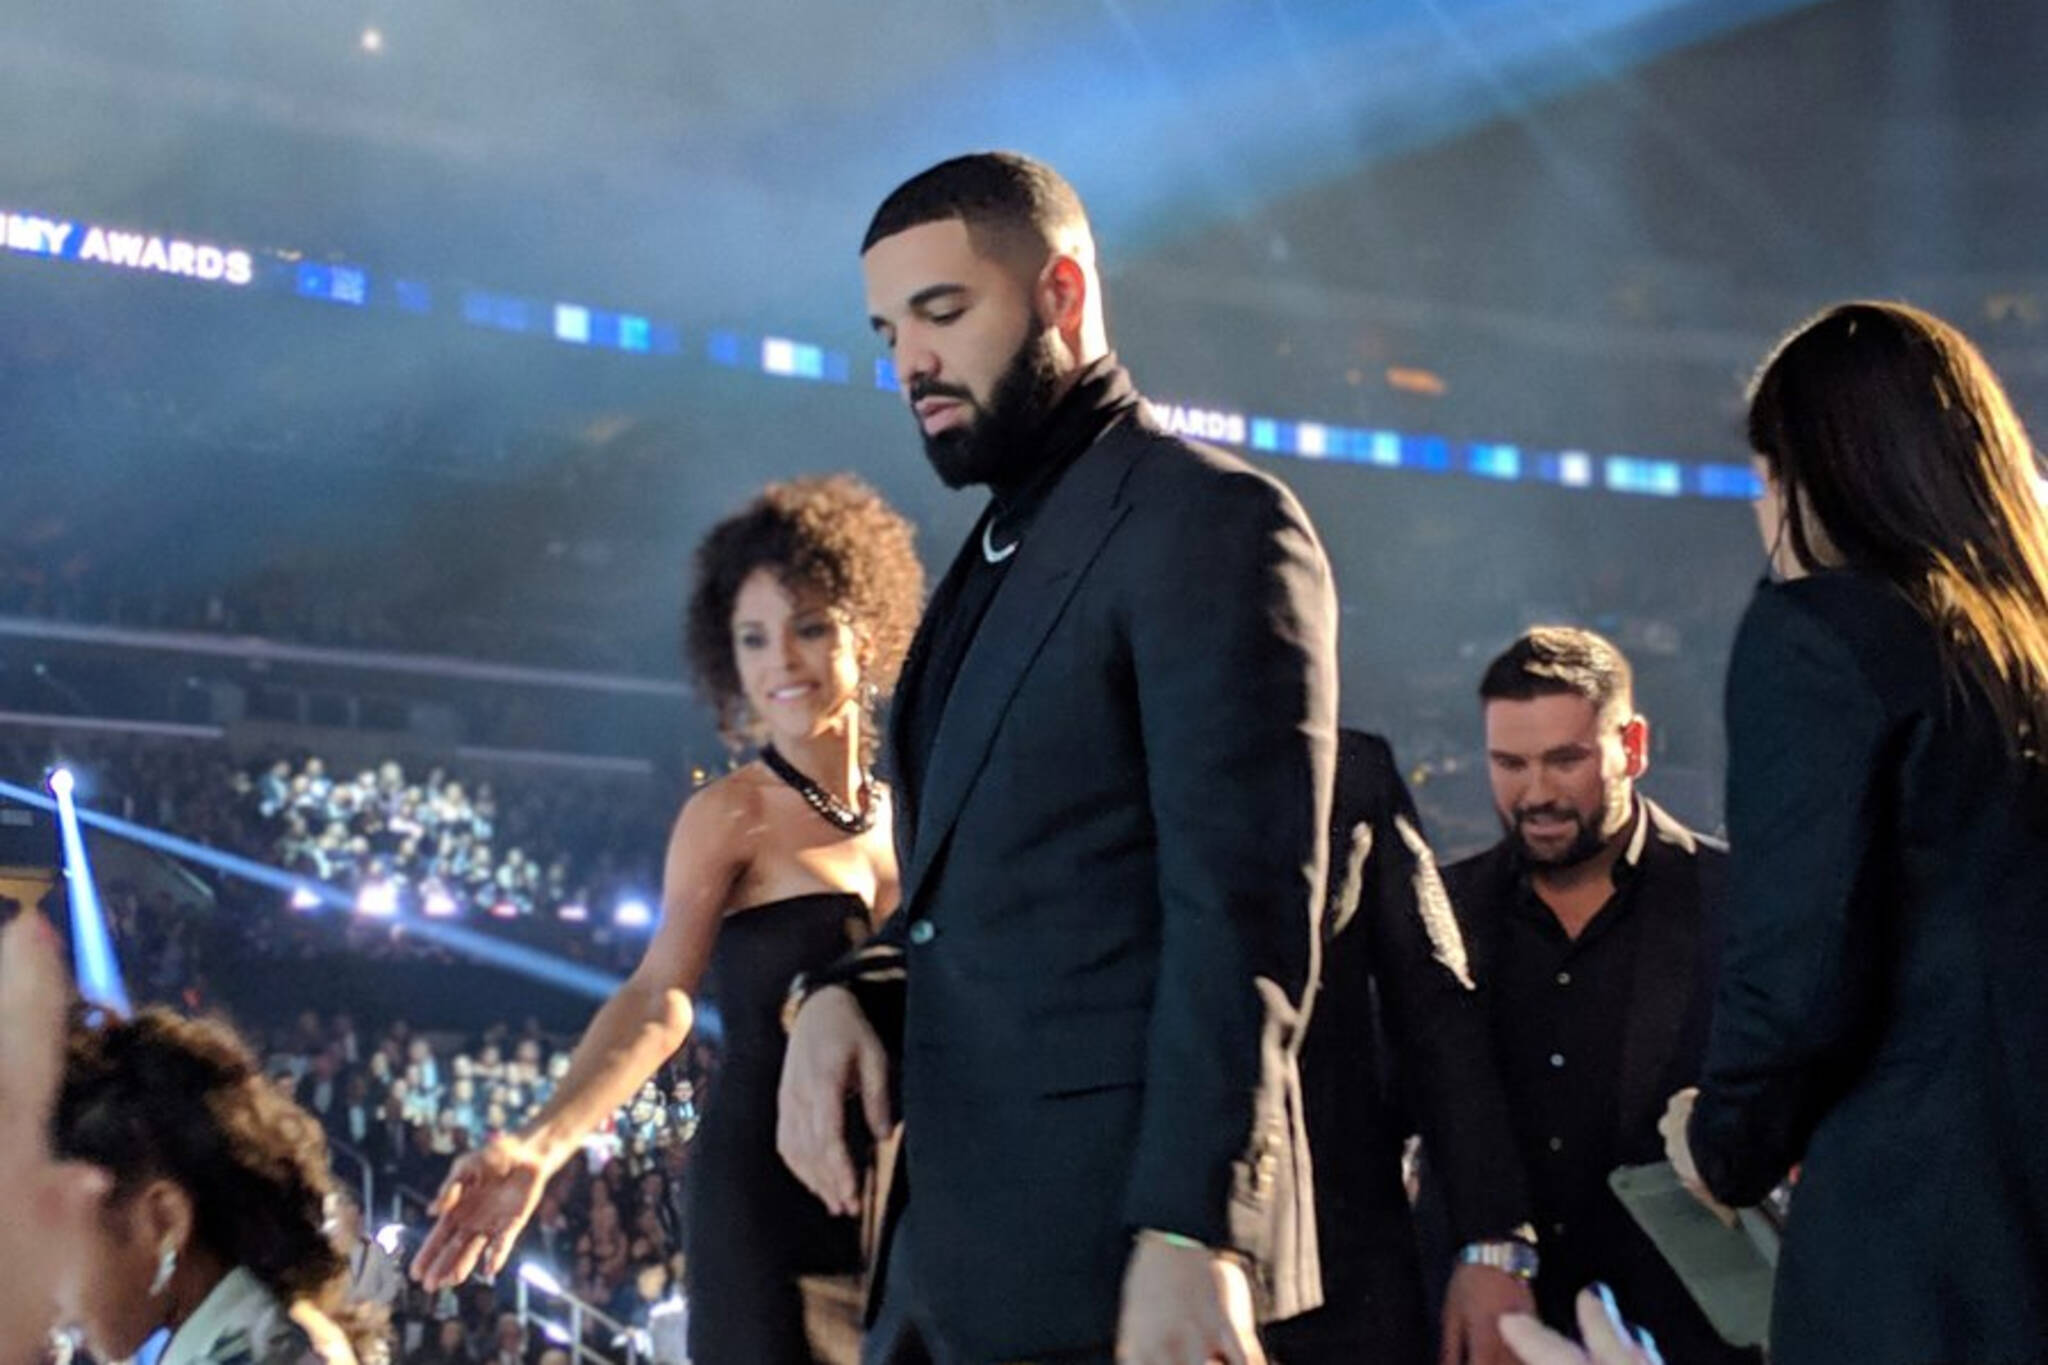 Drake threw shade at the Grammys during his acceptance speech